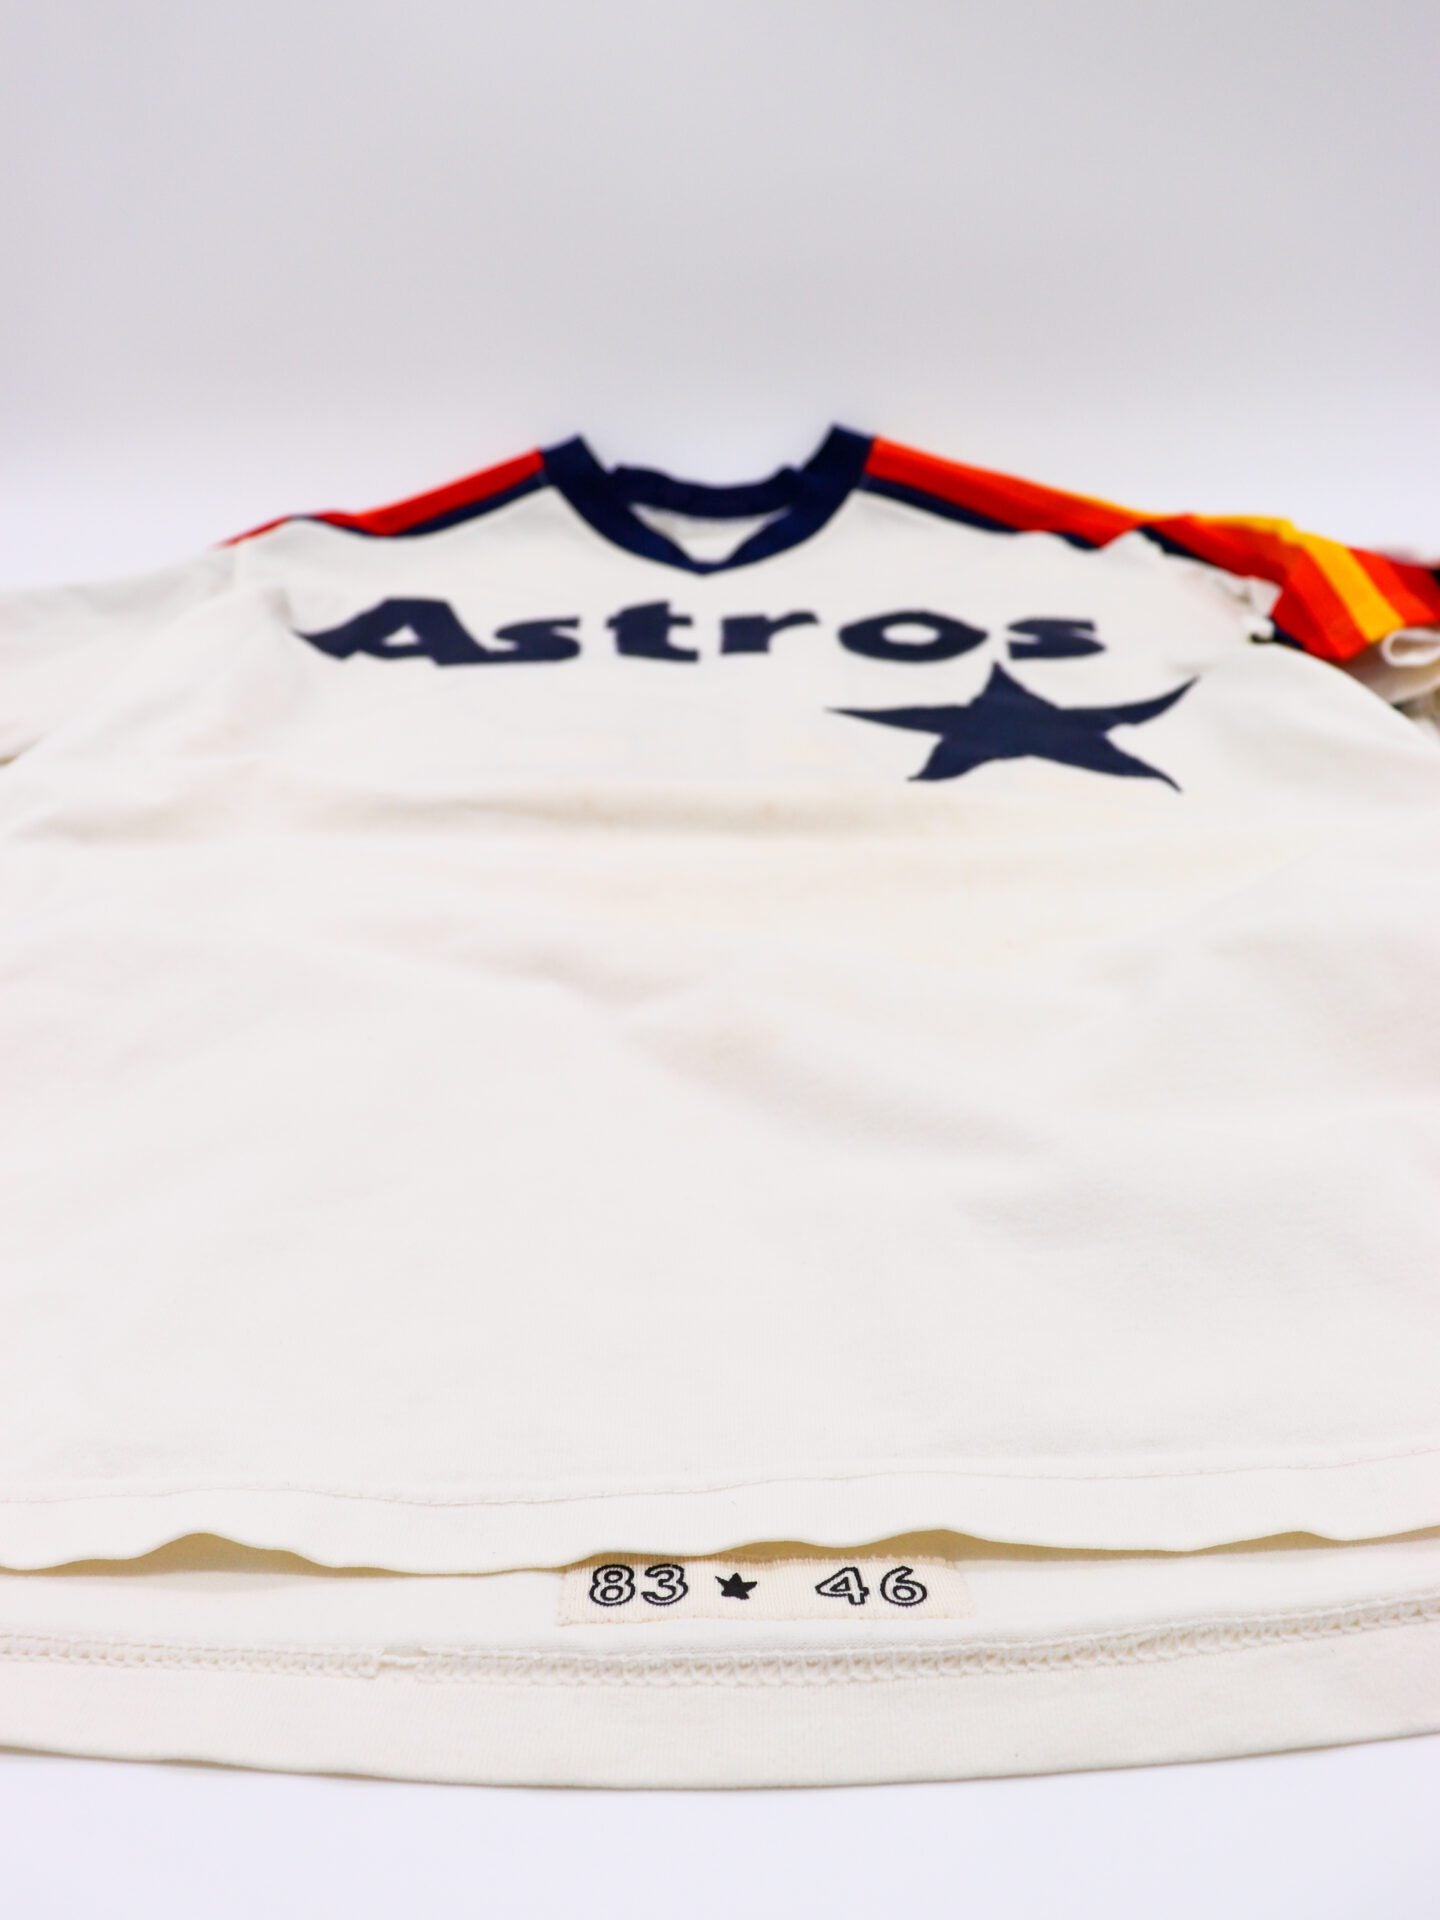 to Die for Collectibles Game Worn 1983 #42 Bert Roberge Houston Astros Road “Rainbow” Jersey, Medalist Sand Knit Size 46